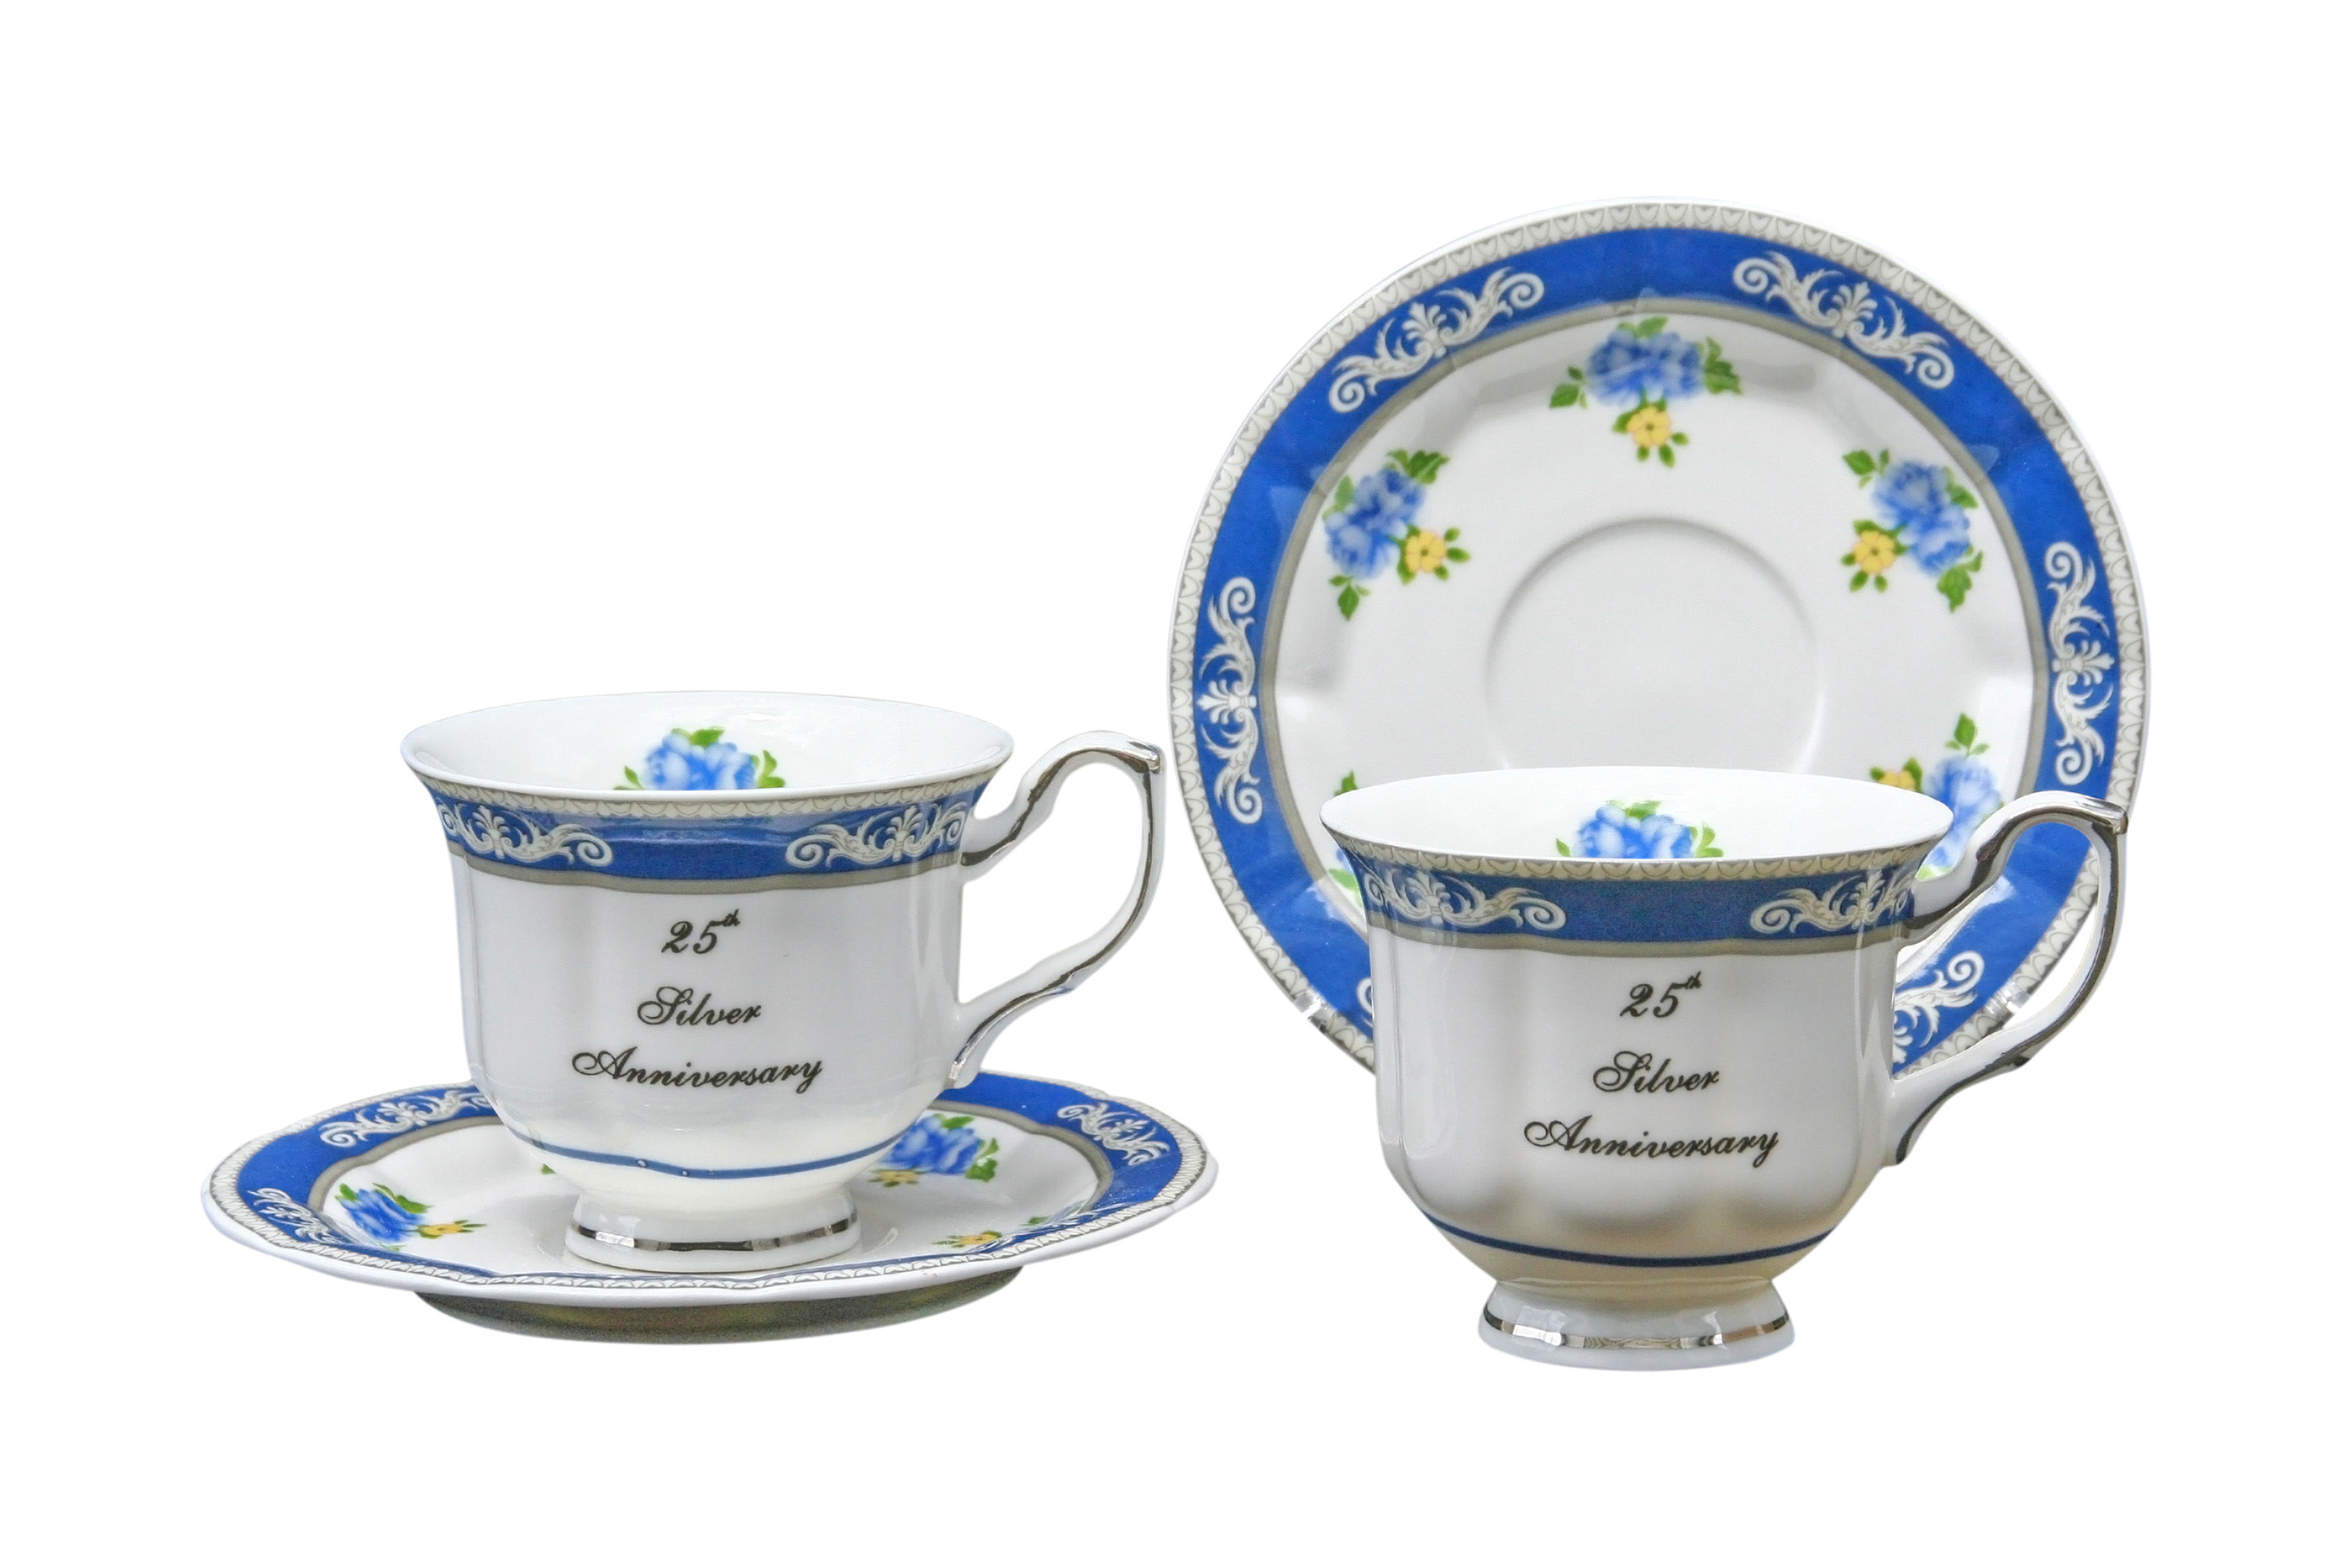 25th Anniversary 2cup and saucer set